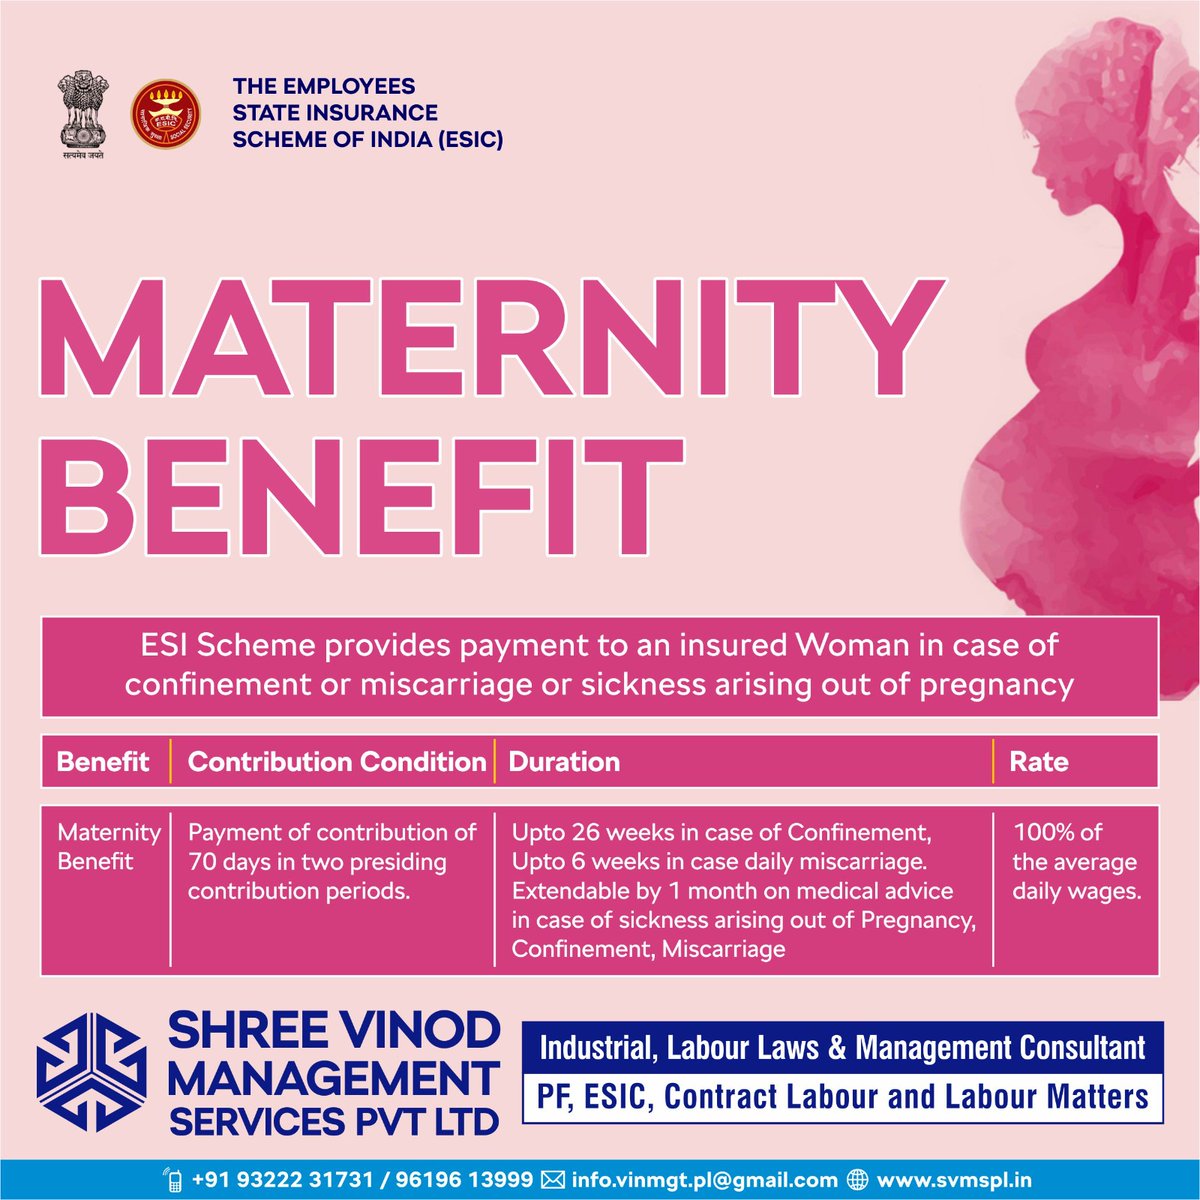 Maternity Benefits !!

#svmspl #business #consultant #maternitybenefits #women #benefits #pregrancy #ESIscheme #india